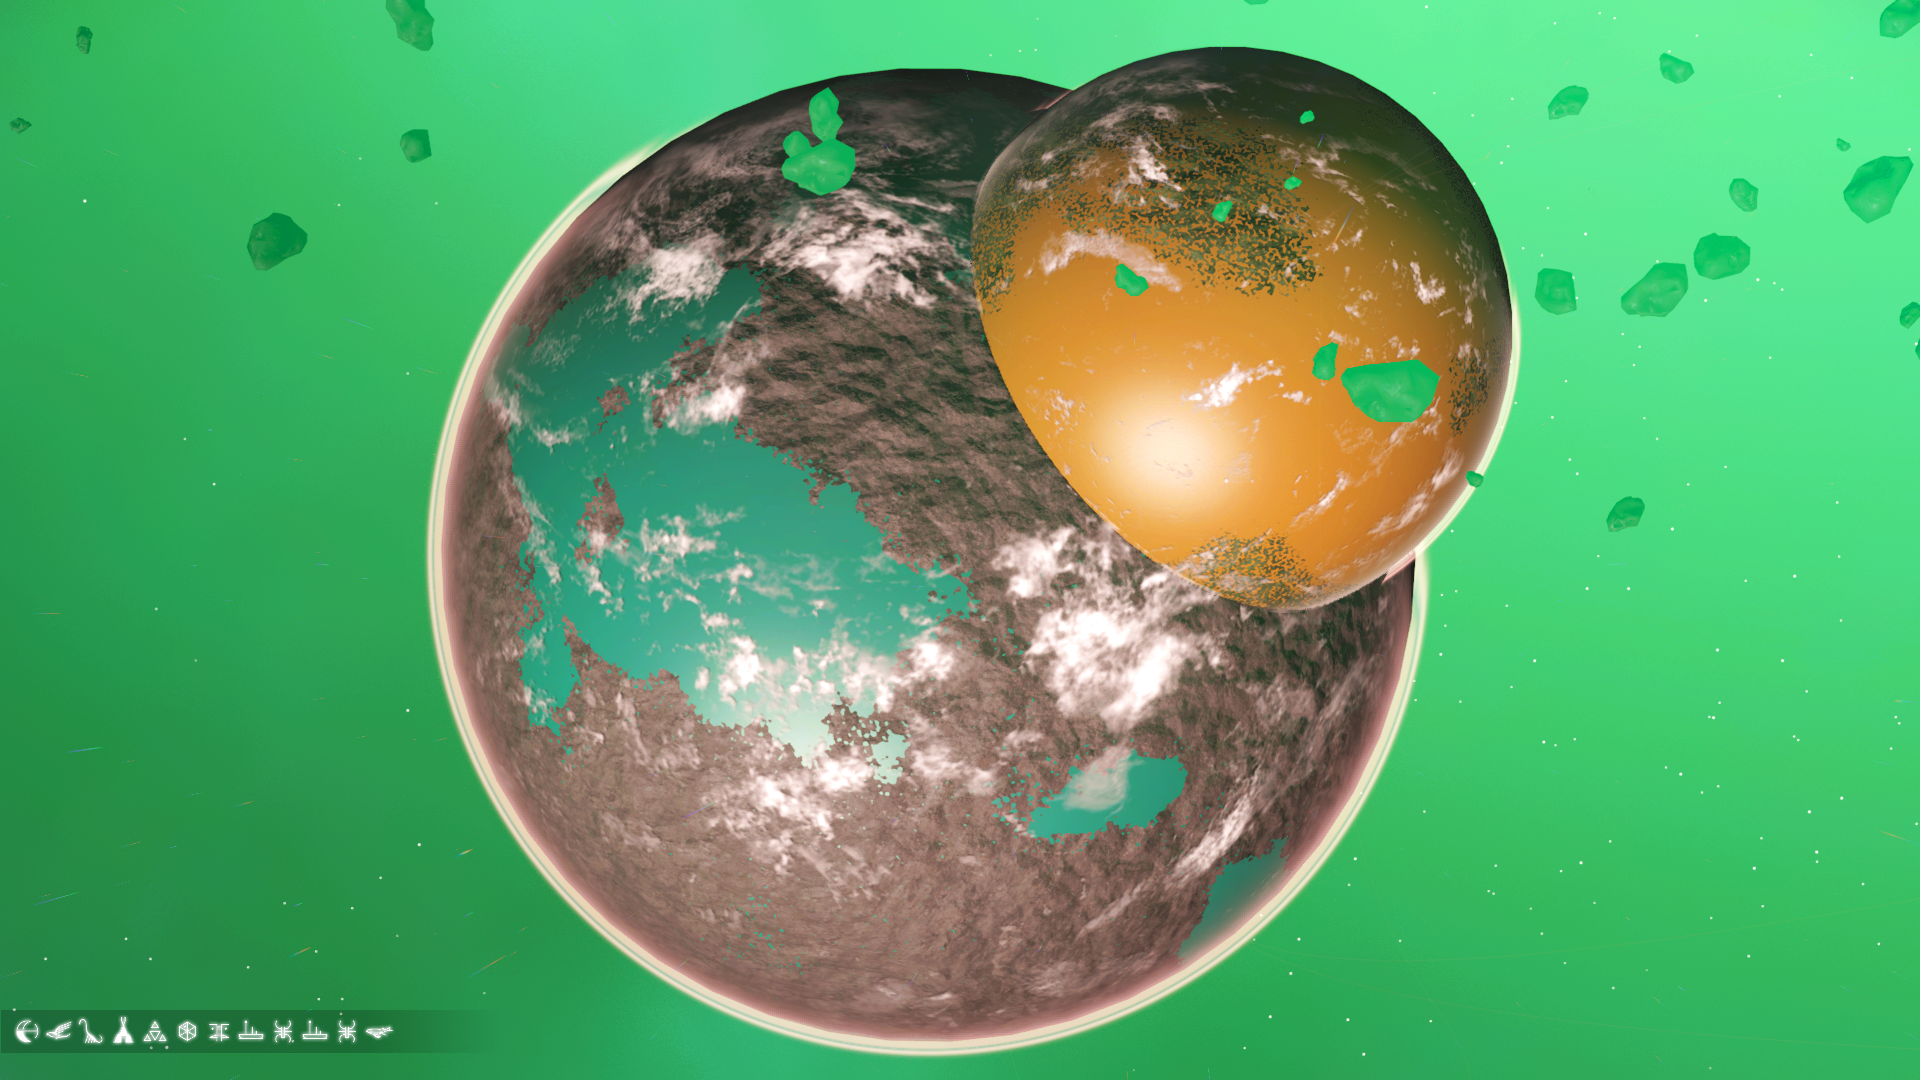 A No Man's Sky player found two planets that are smooshed together